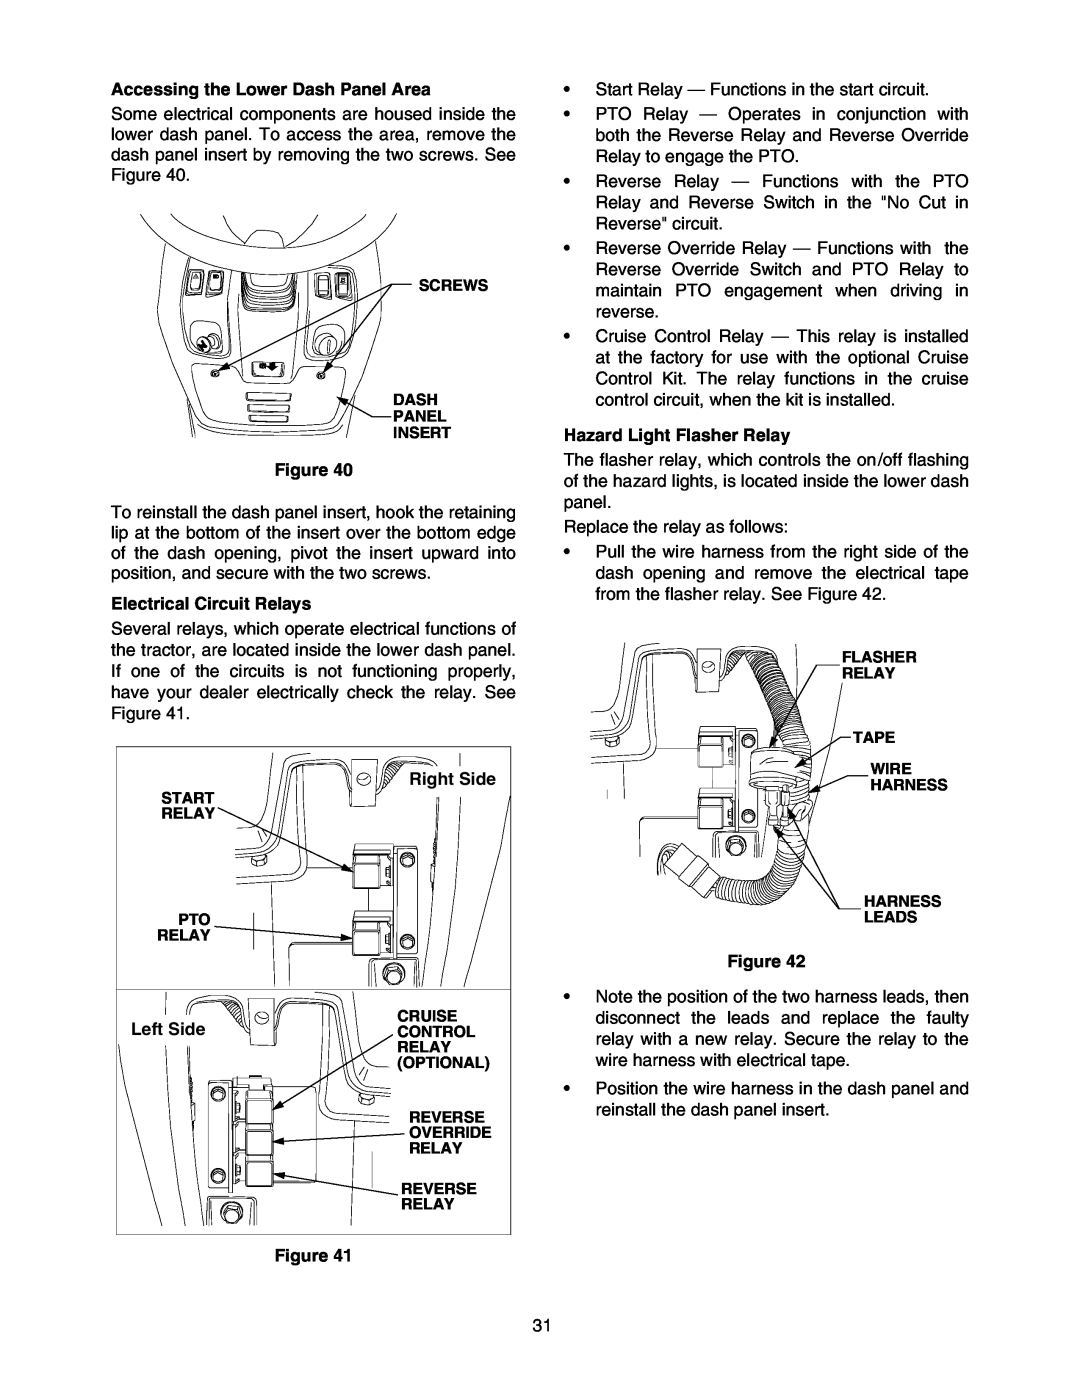 Cub Cadet 5254 manual Accessing the Lower Dash Panel Area, Electrical Circuit Relays, Right Side, Left Side 